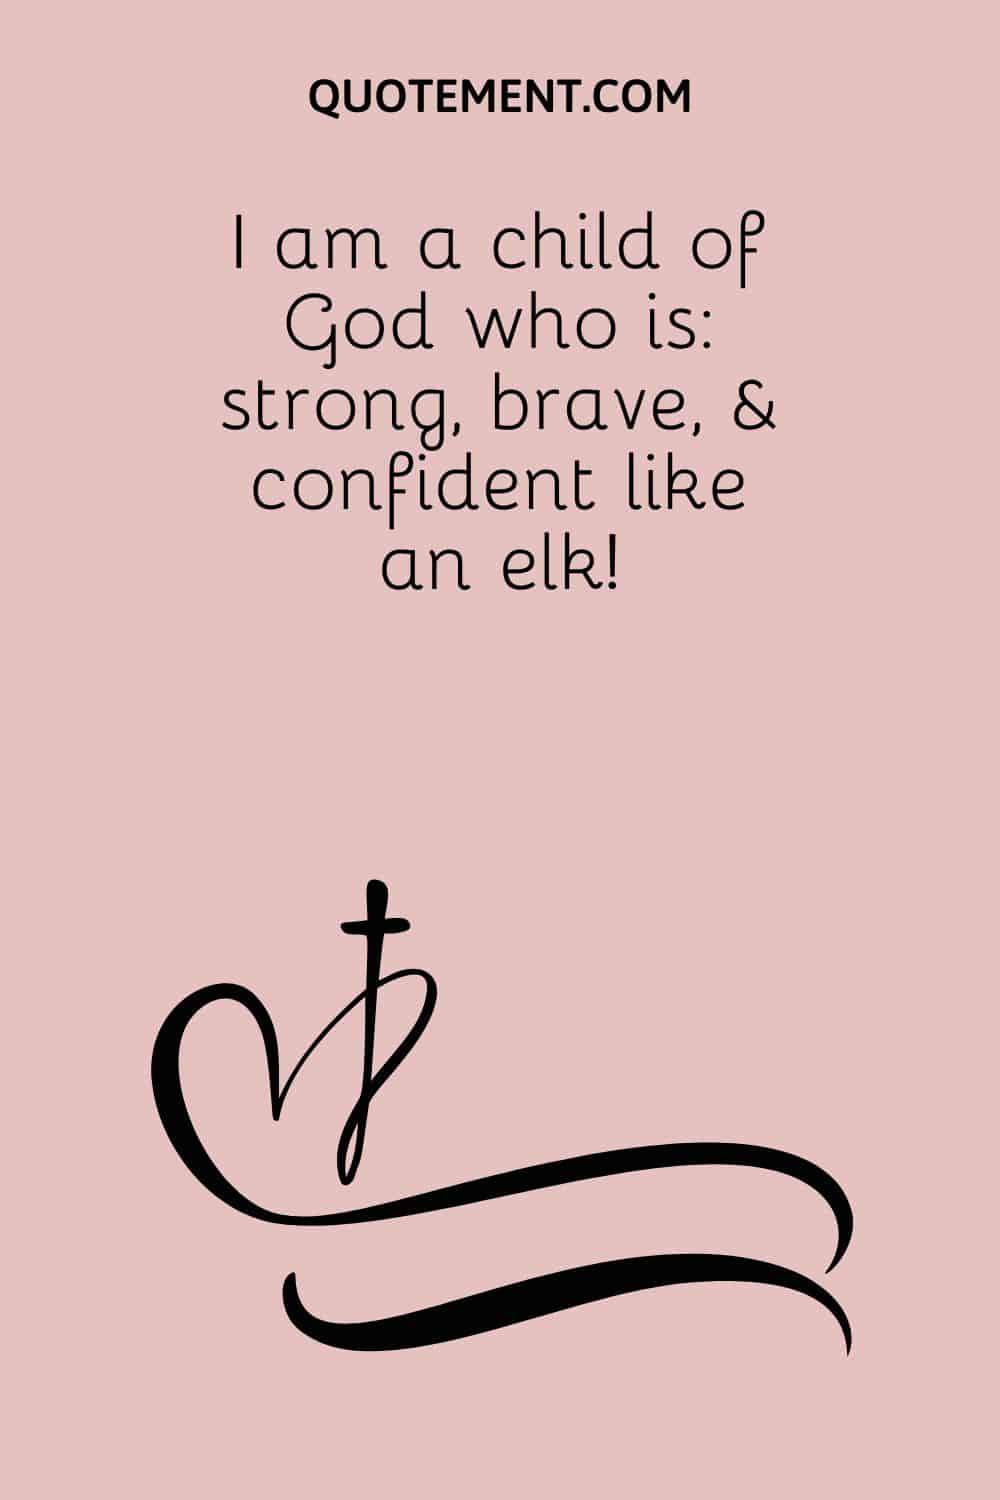 I am a child of God who is strong, brave, & confident like an elk